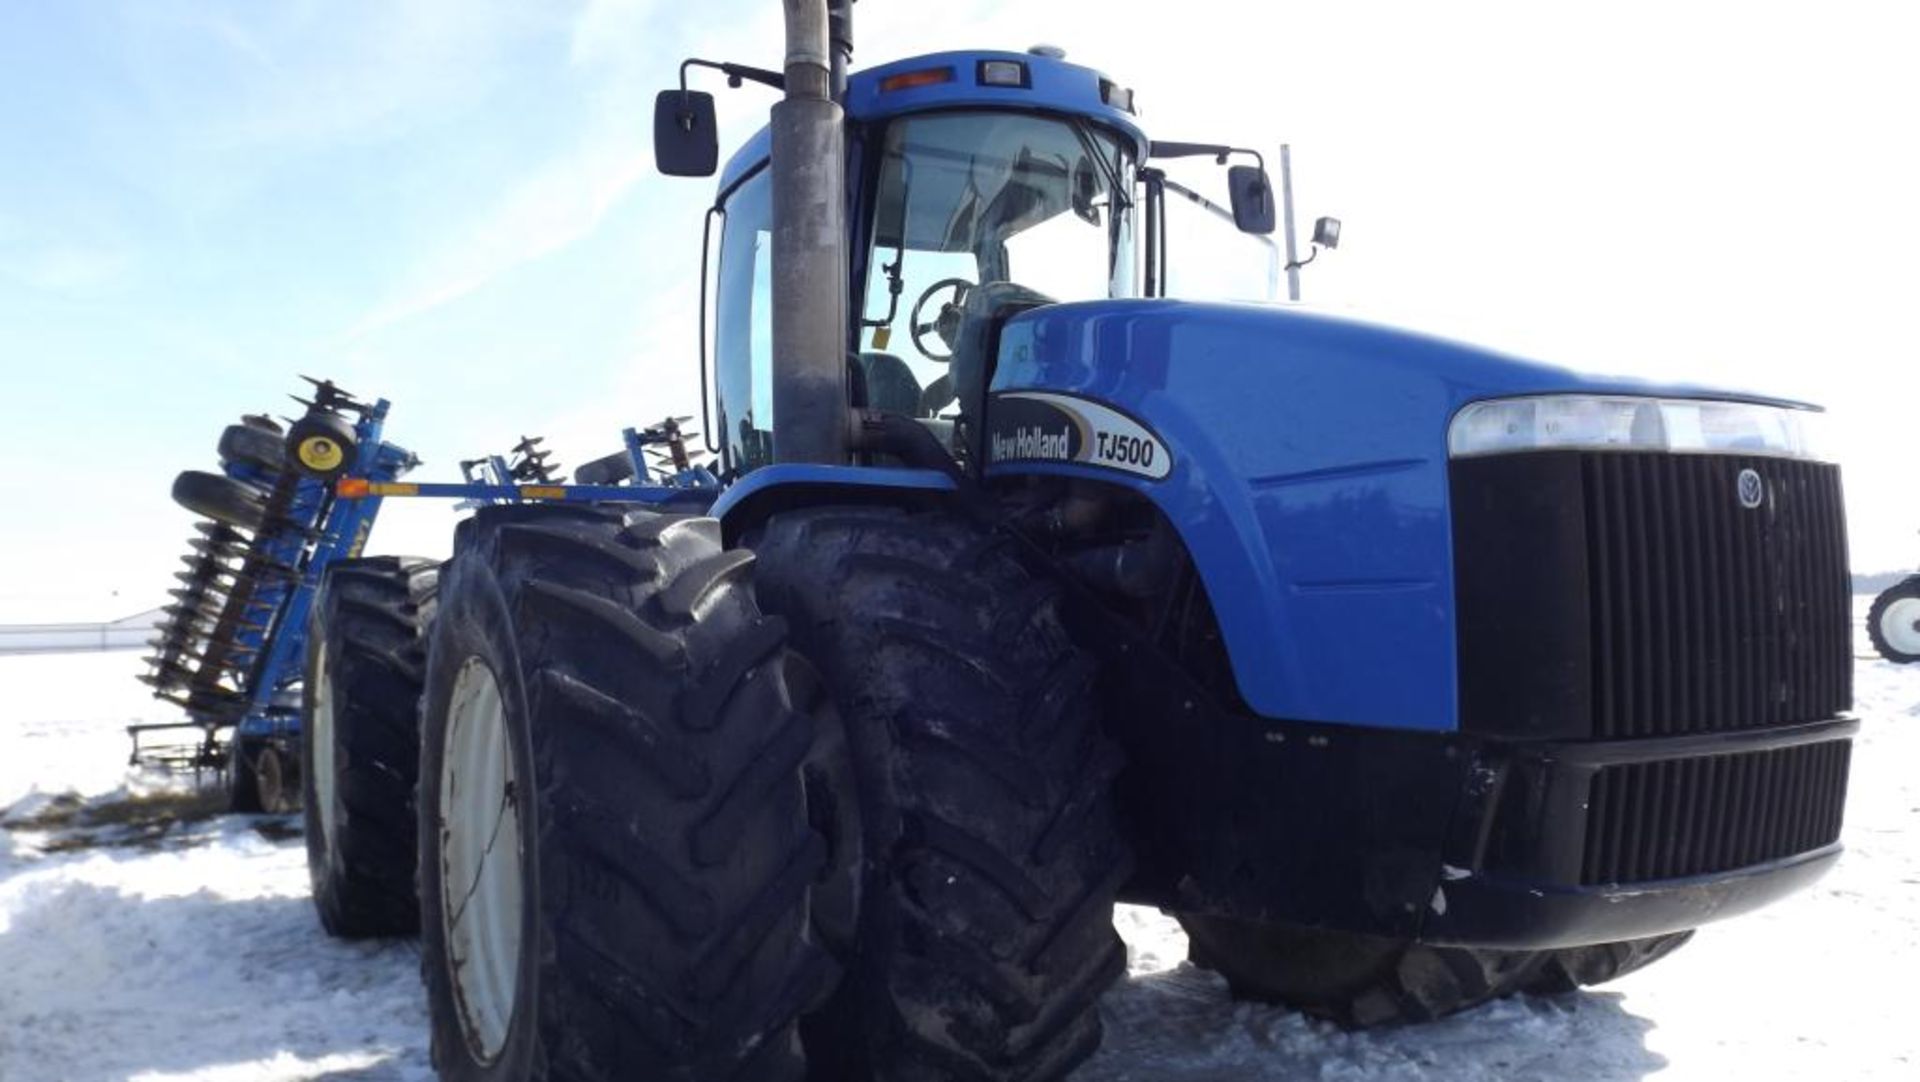 New Holland TJ500 Tractor '05, sn#RVS005048 4617 Hrs, 4WD, Fully Equipped Cab, 500 HP, 16/2 PS, - Image 2 of 24